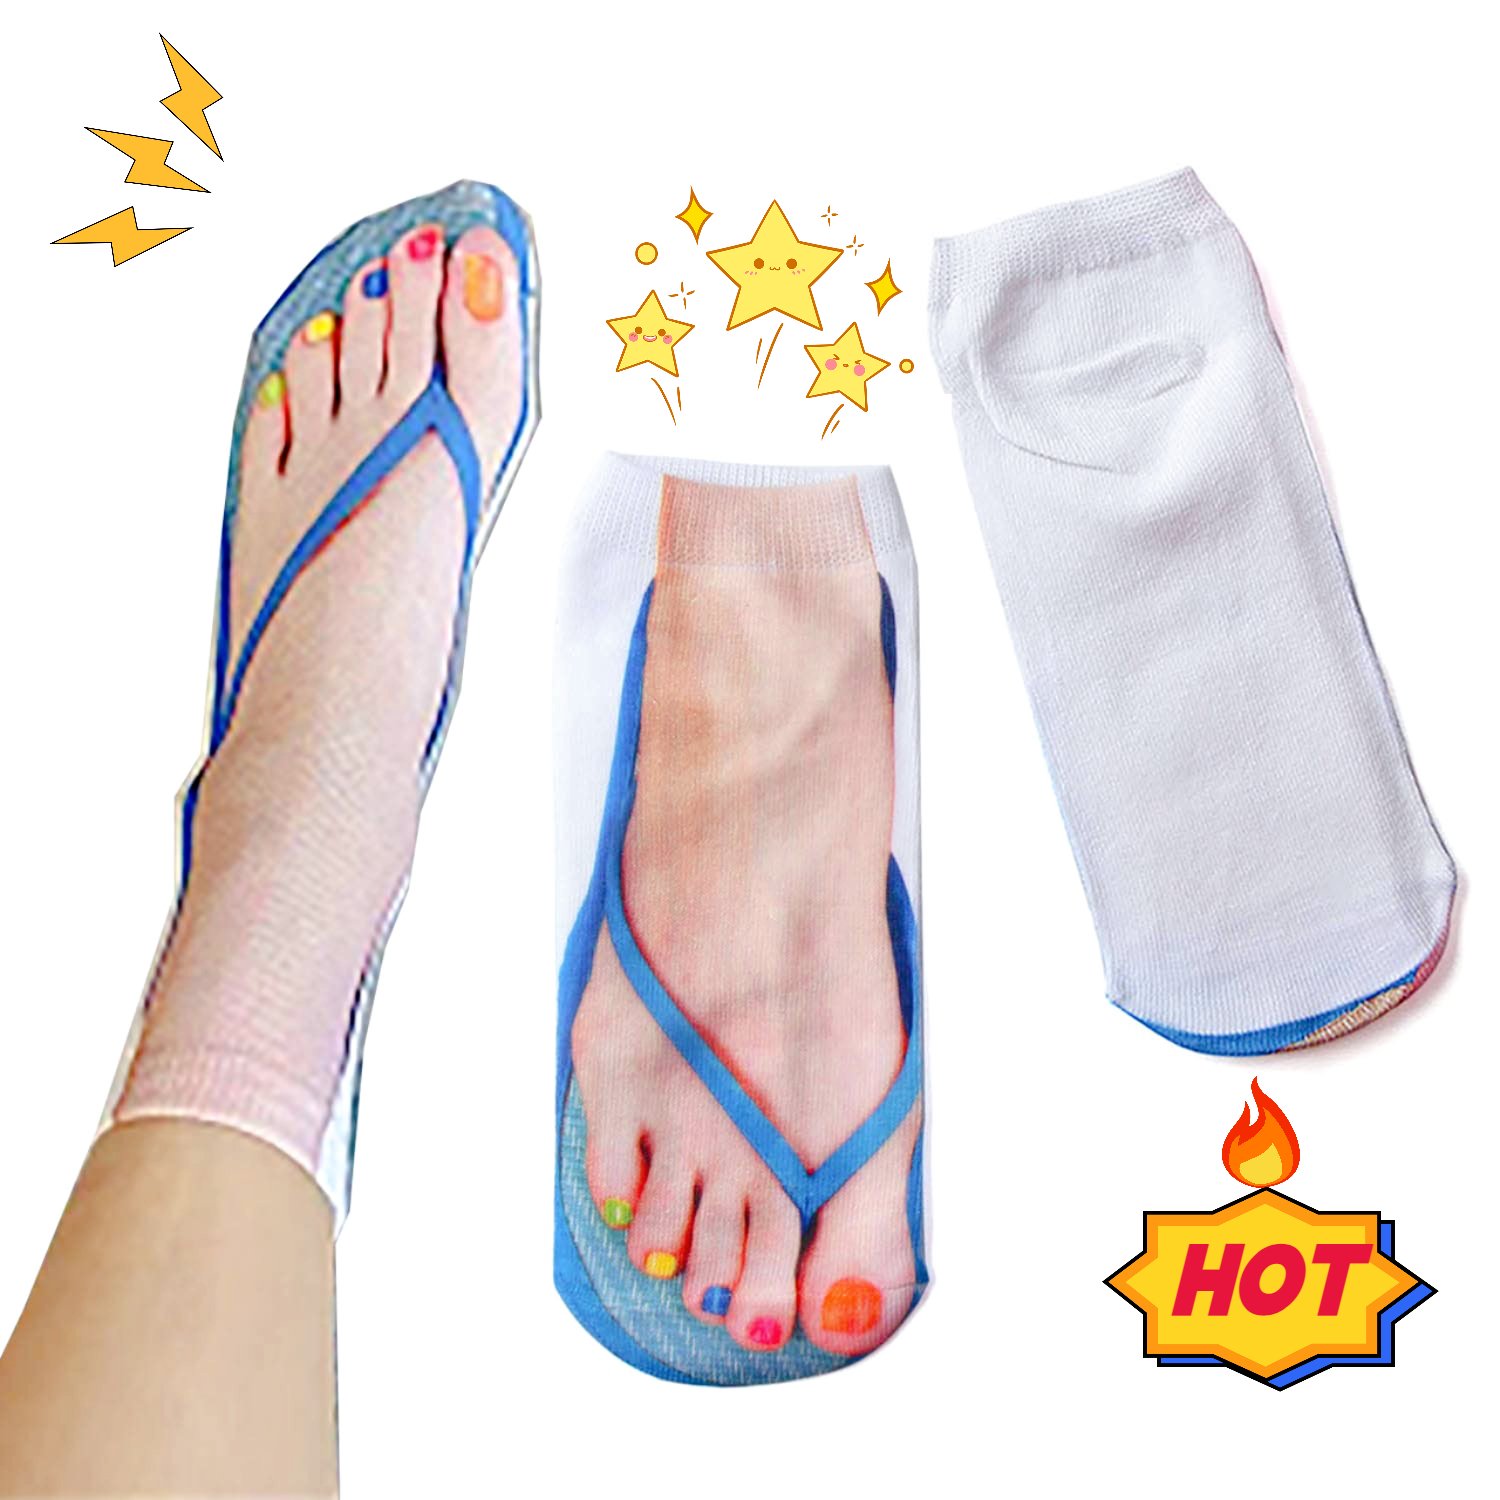 🔥LAST DAY 49% OFF🔥 ✨Funny and weird socks✨BUY 5 GET 3 FREE (8PCS) LAST DAY🔥